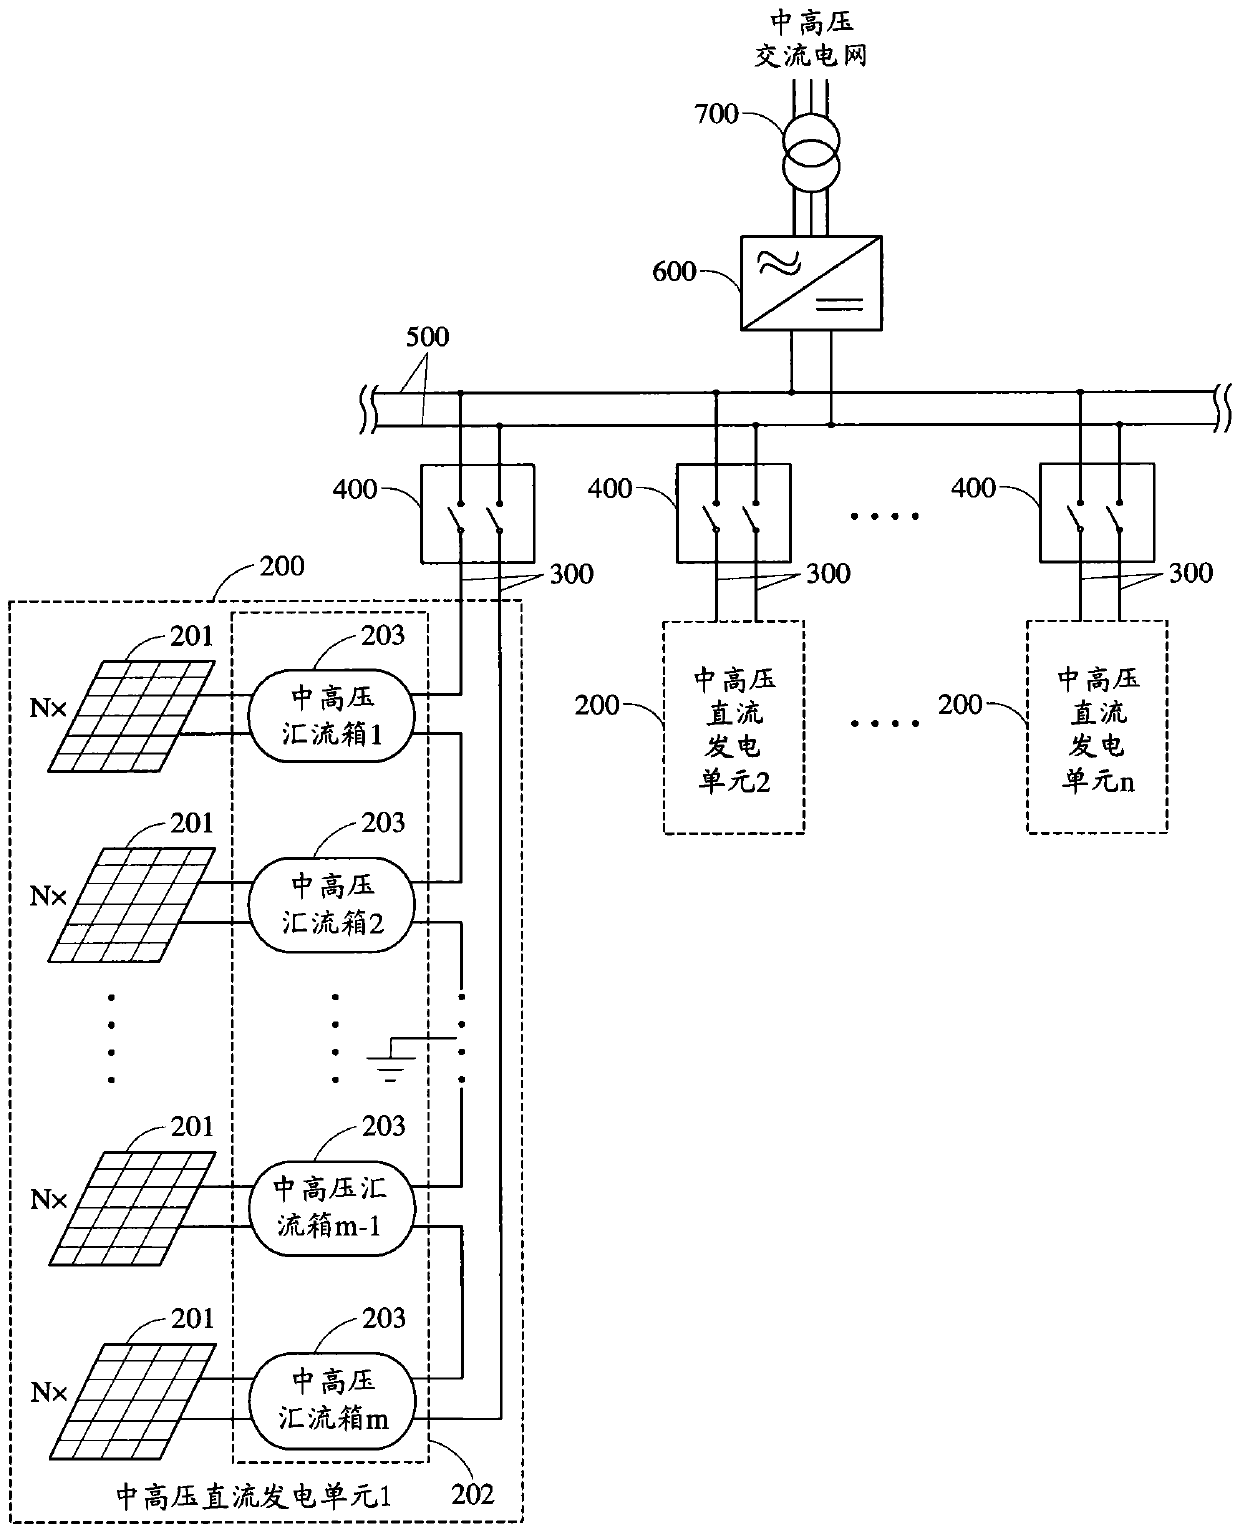 A photovoltaic grid-connected power generation system based on medium and high voltage direct current access